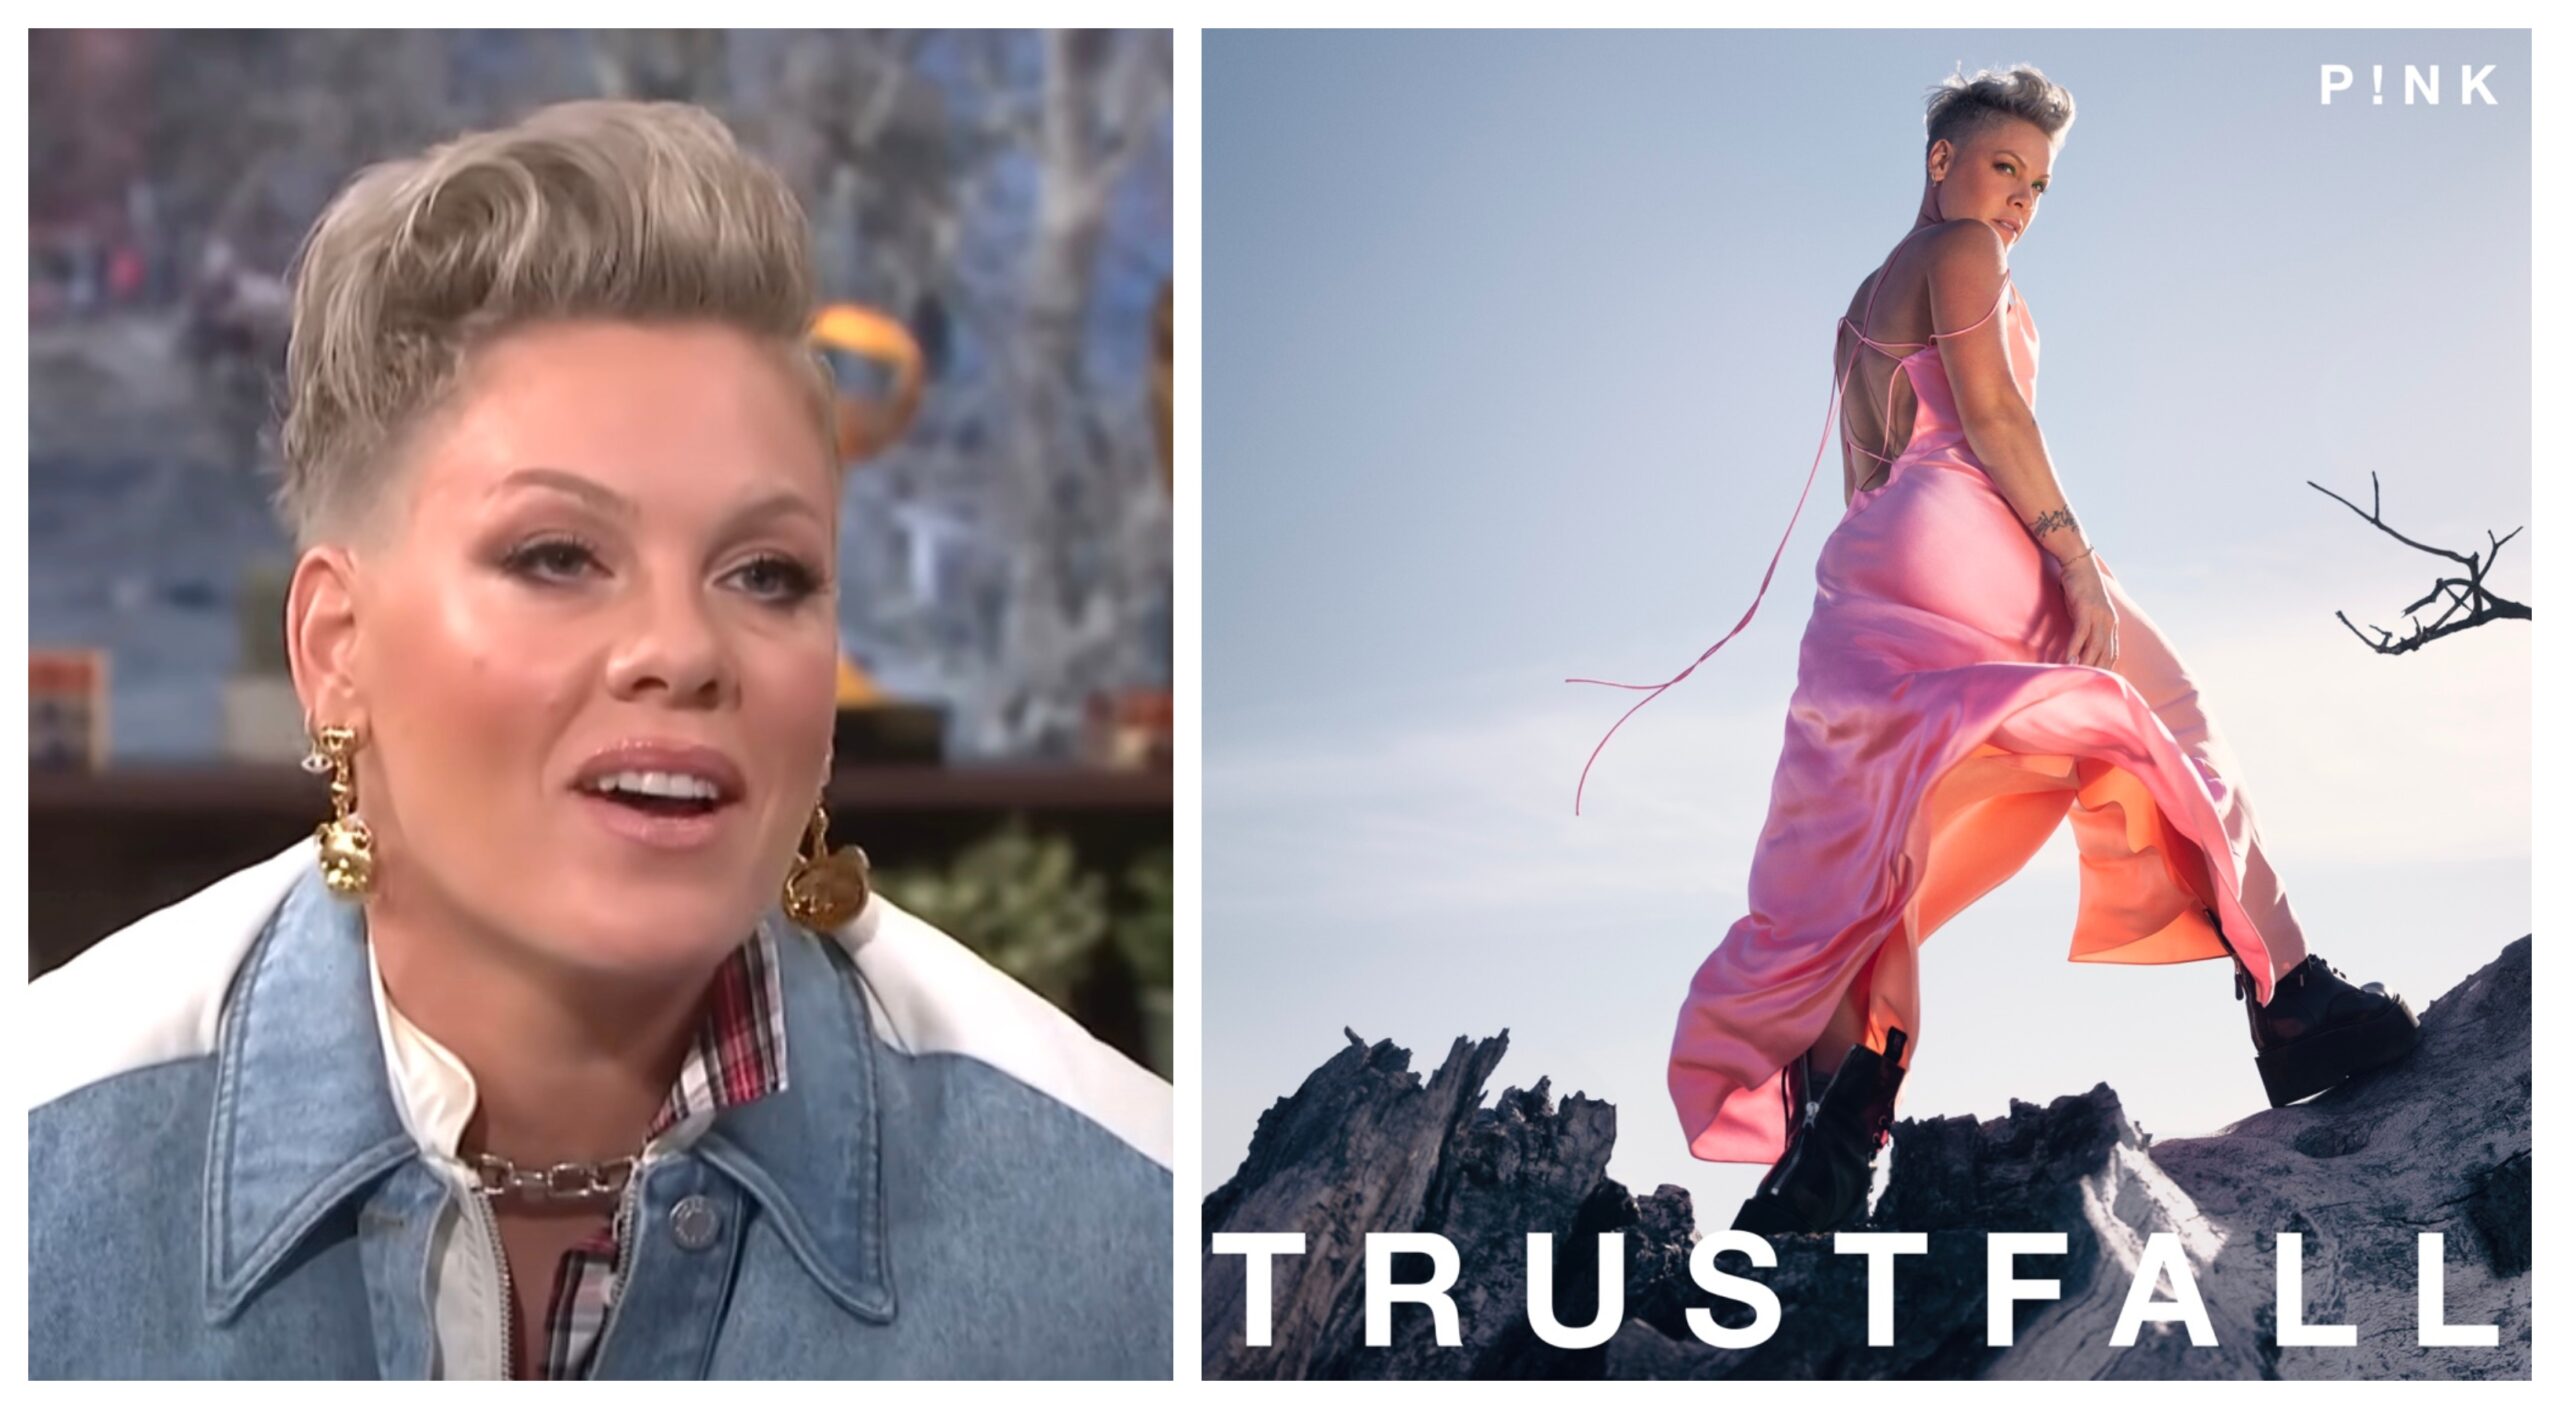 Pink Says New Album 'Trustfall' is Her "Best" Yet That Grape Juice